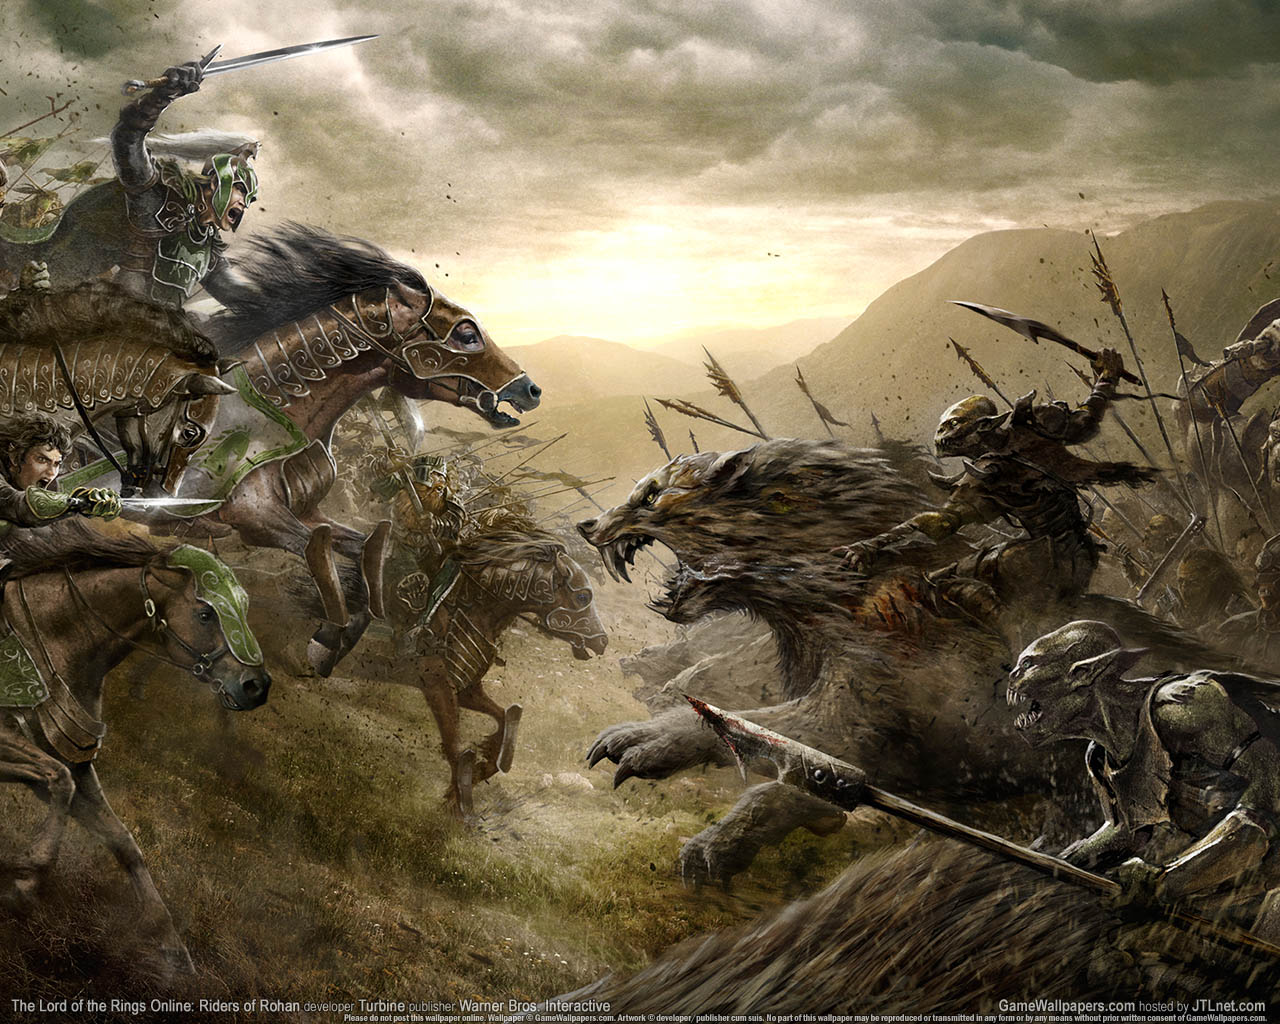 The Lord of the Rings Online%3A Riders of Rohan fond d'cran 01 1280x1024